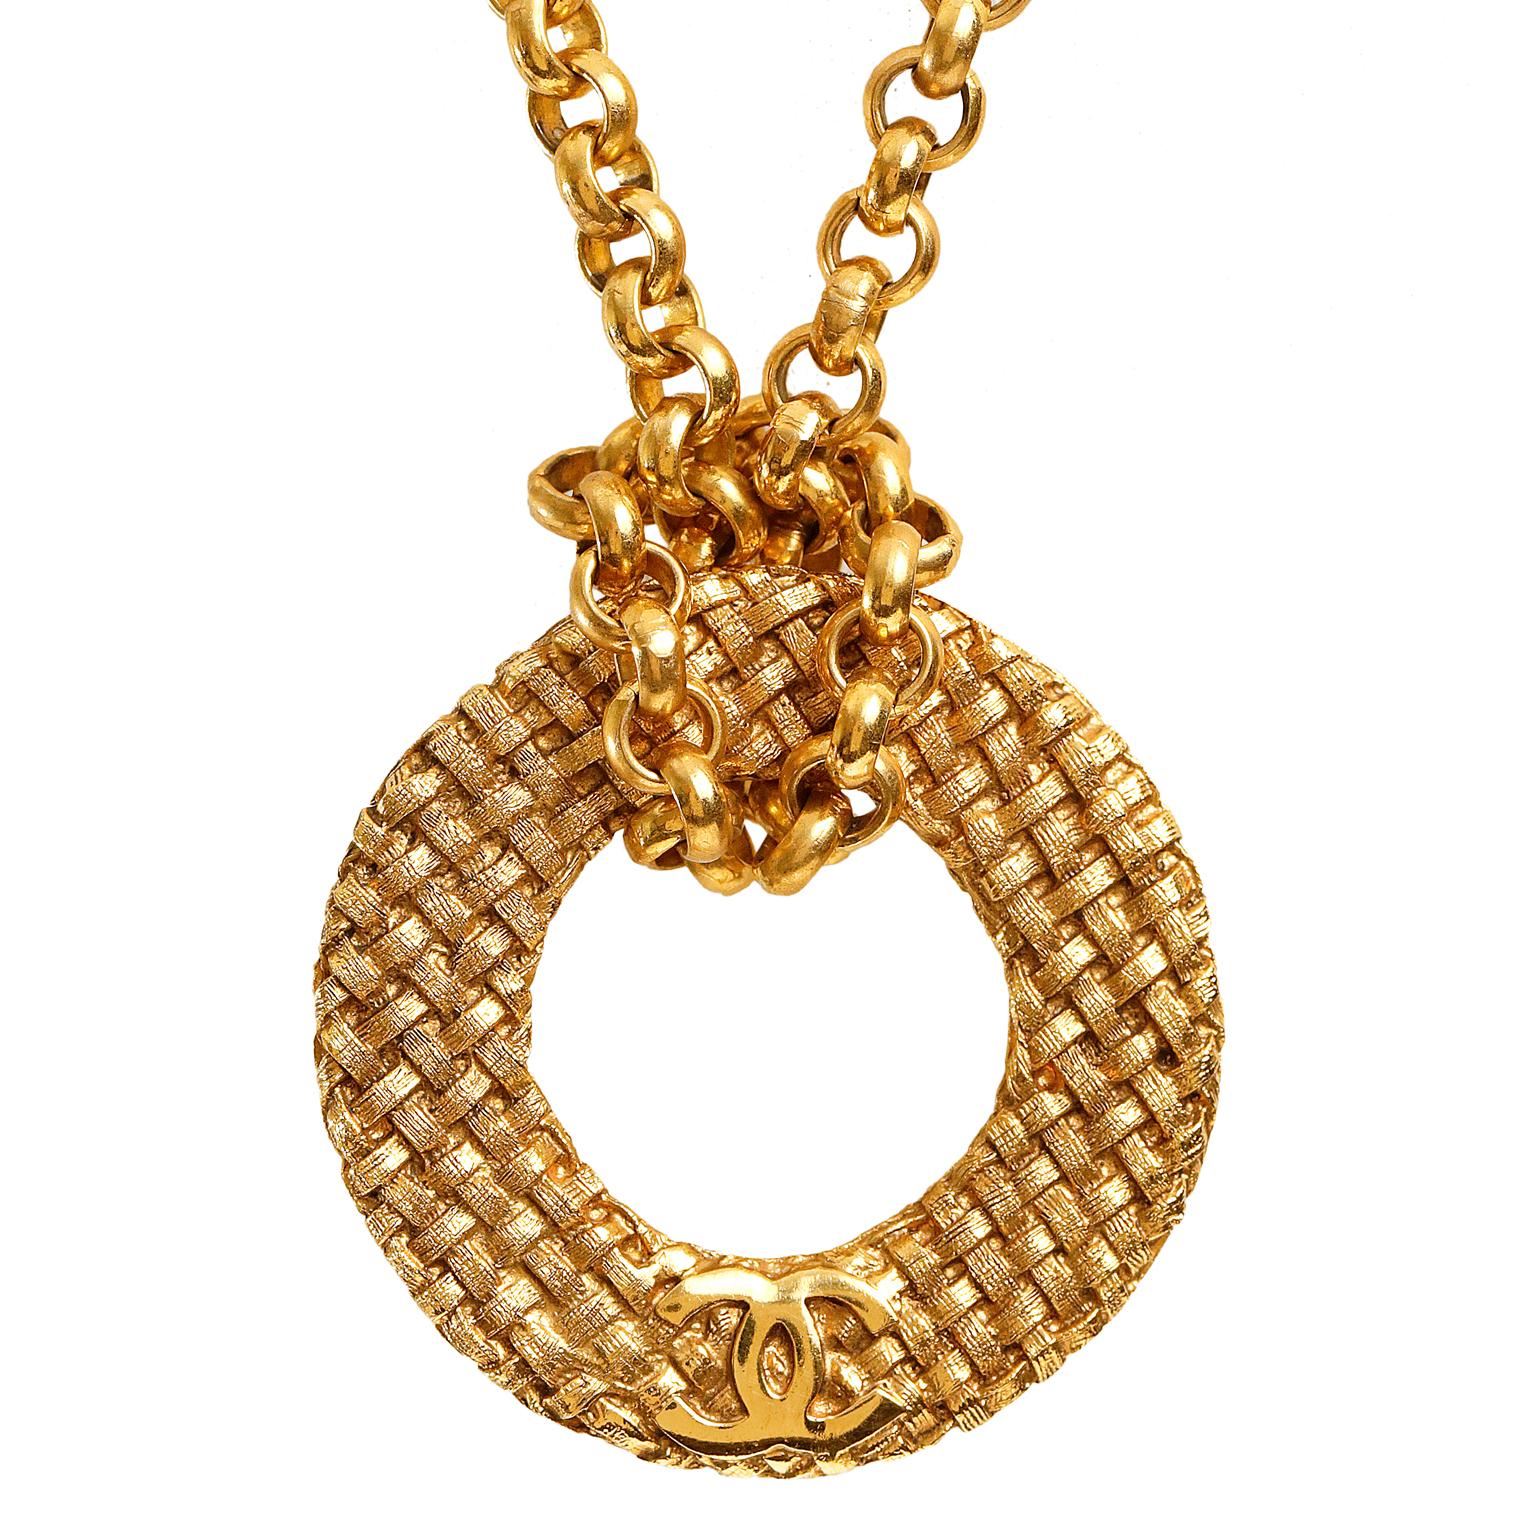 Chanel Vintage  Gold Plated Medallion Long Necklace- mint condition.   From the late 1980’s; collection 29.
Long linked gold-plated necklace loops around a circular medallion with interlocking CC and woven texture.  Spring ring clasp.  Made in